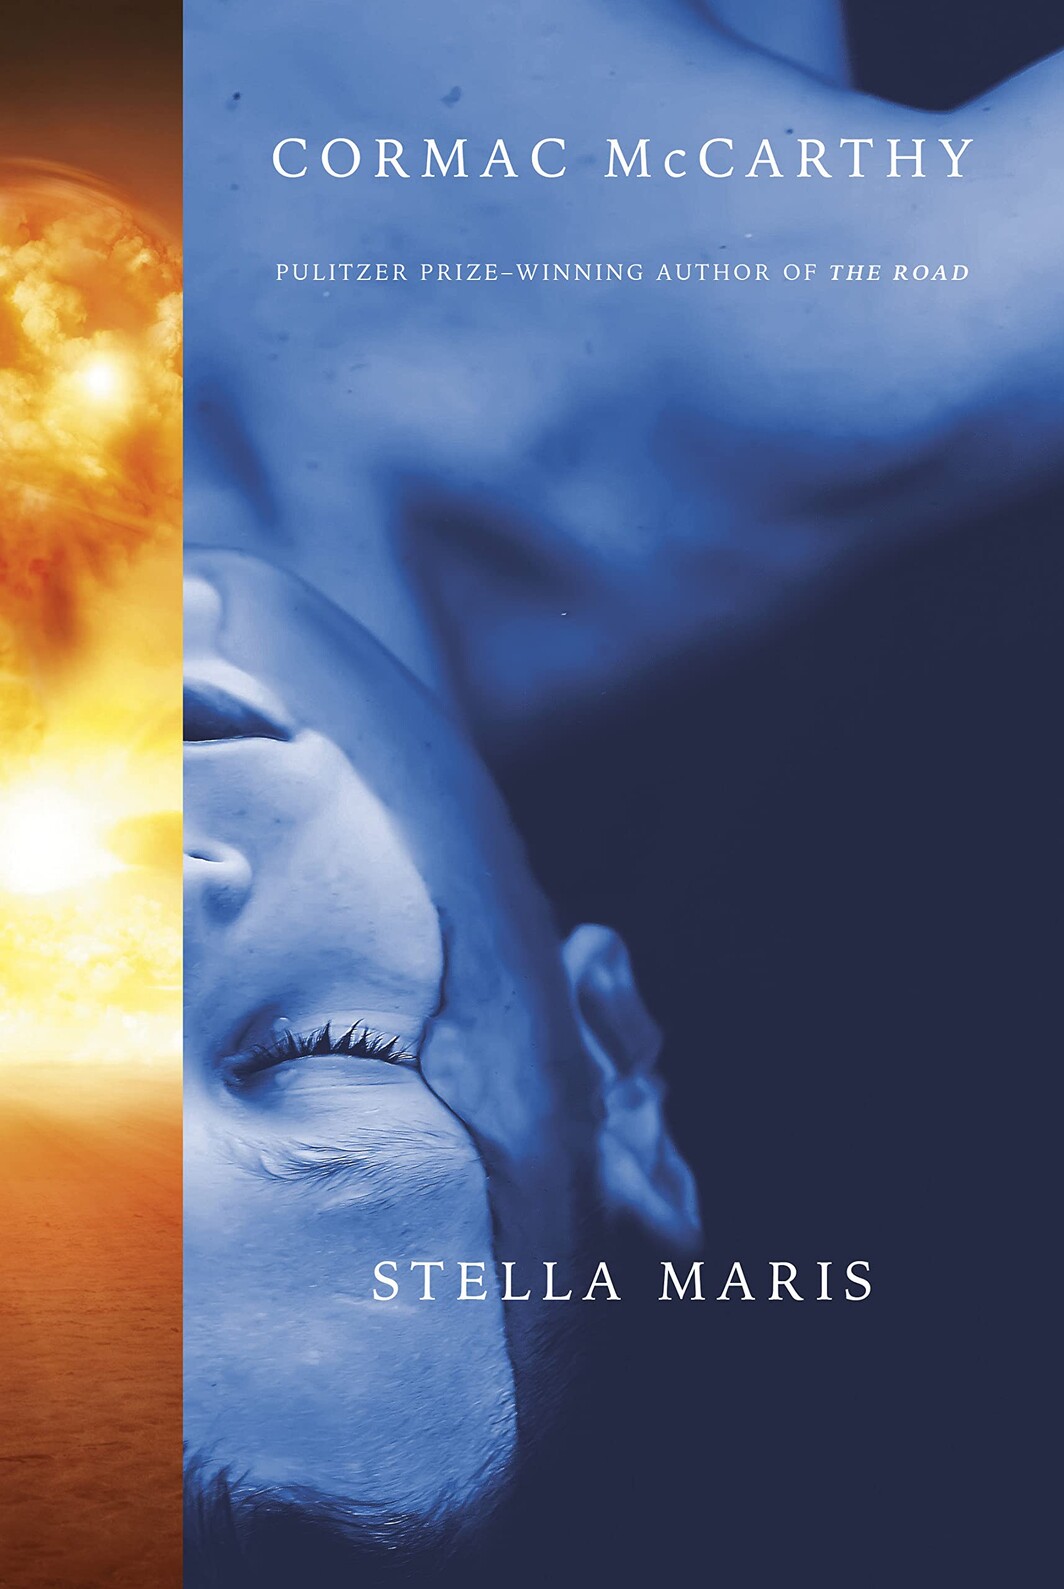 The cover of Stella Maris